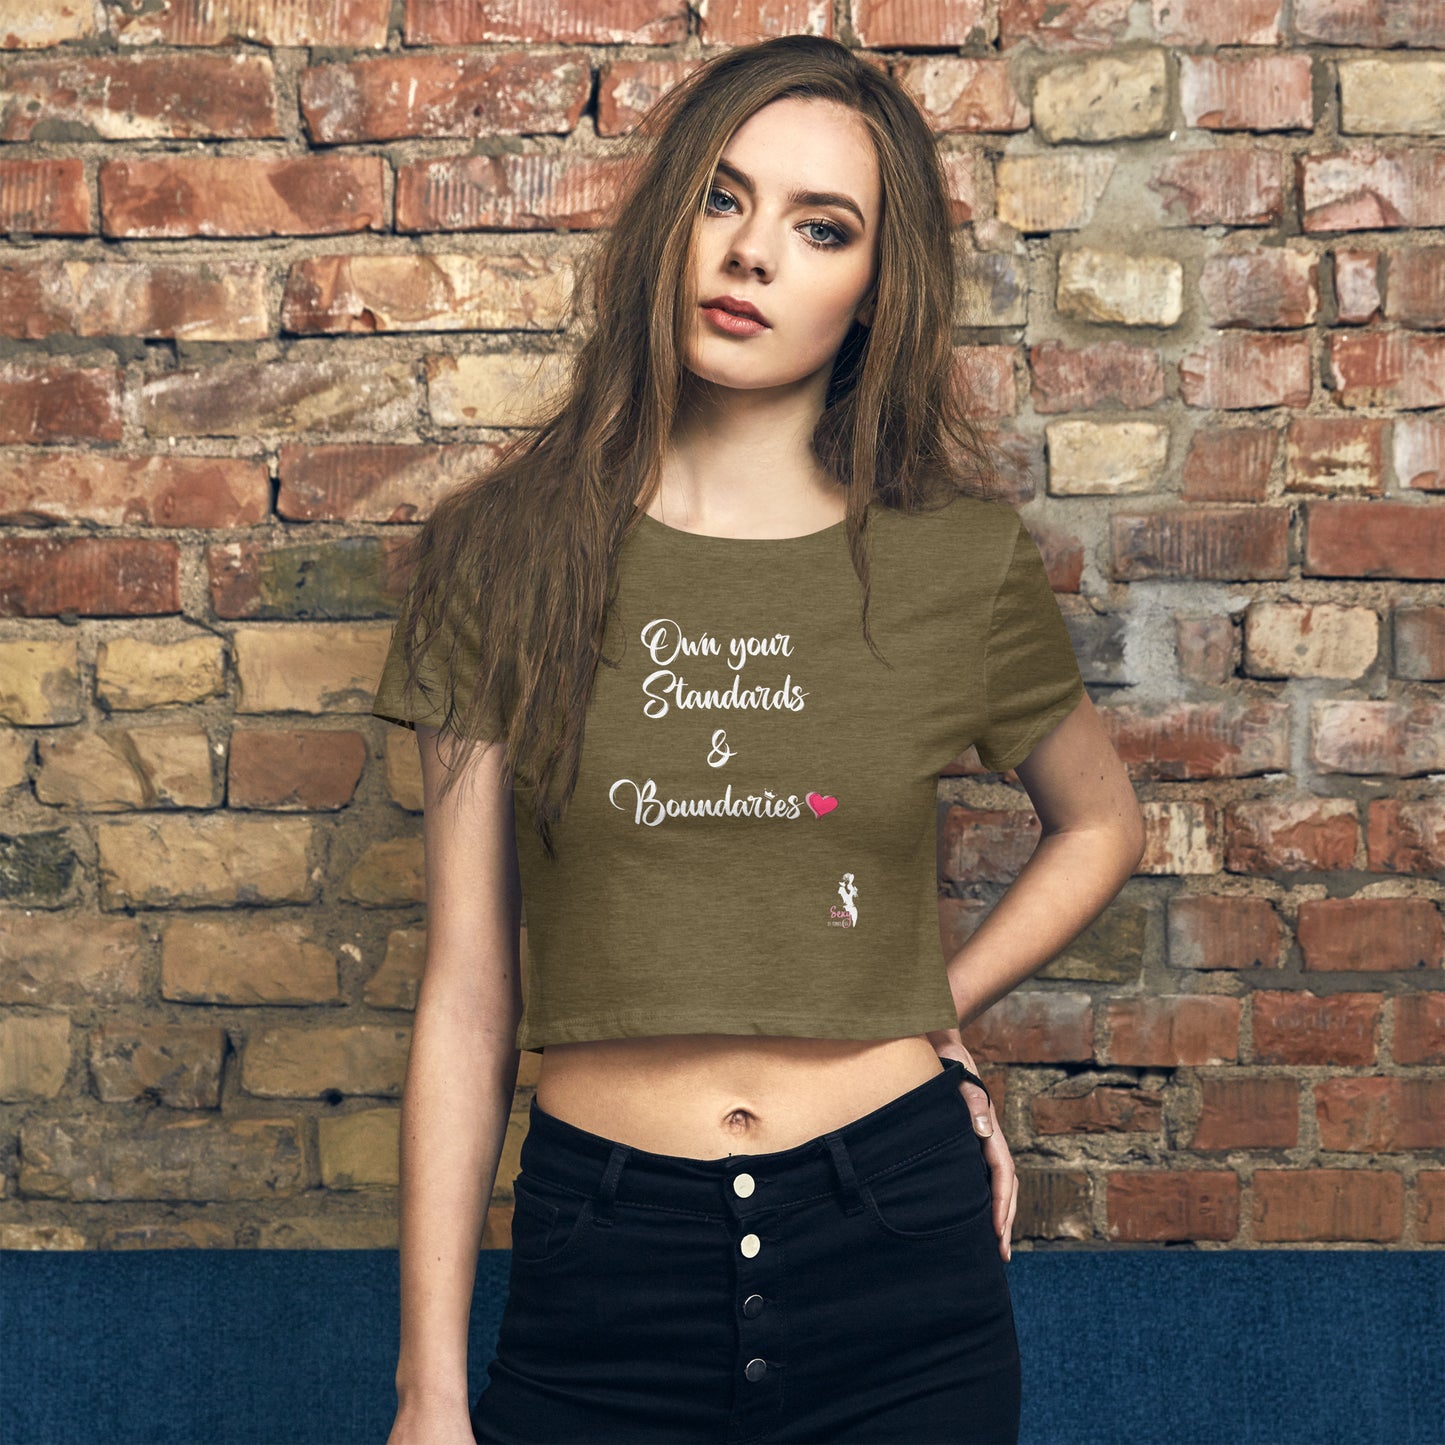 Women’s Crop Tee - Own your standards and boundaries - Colors